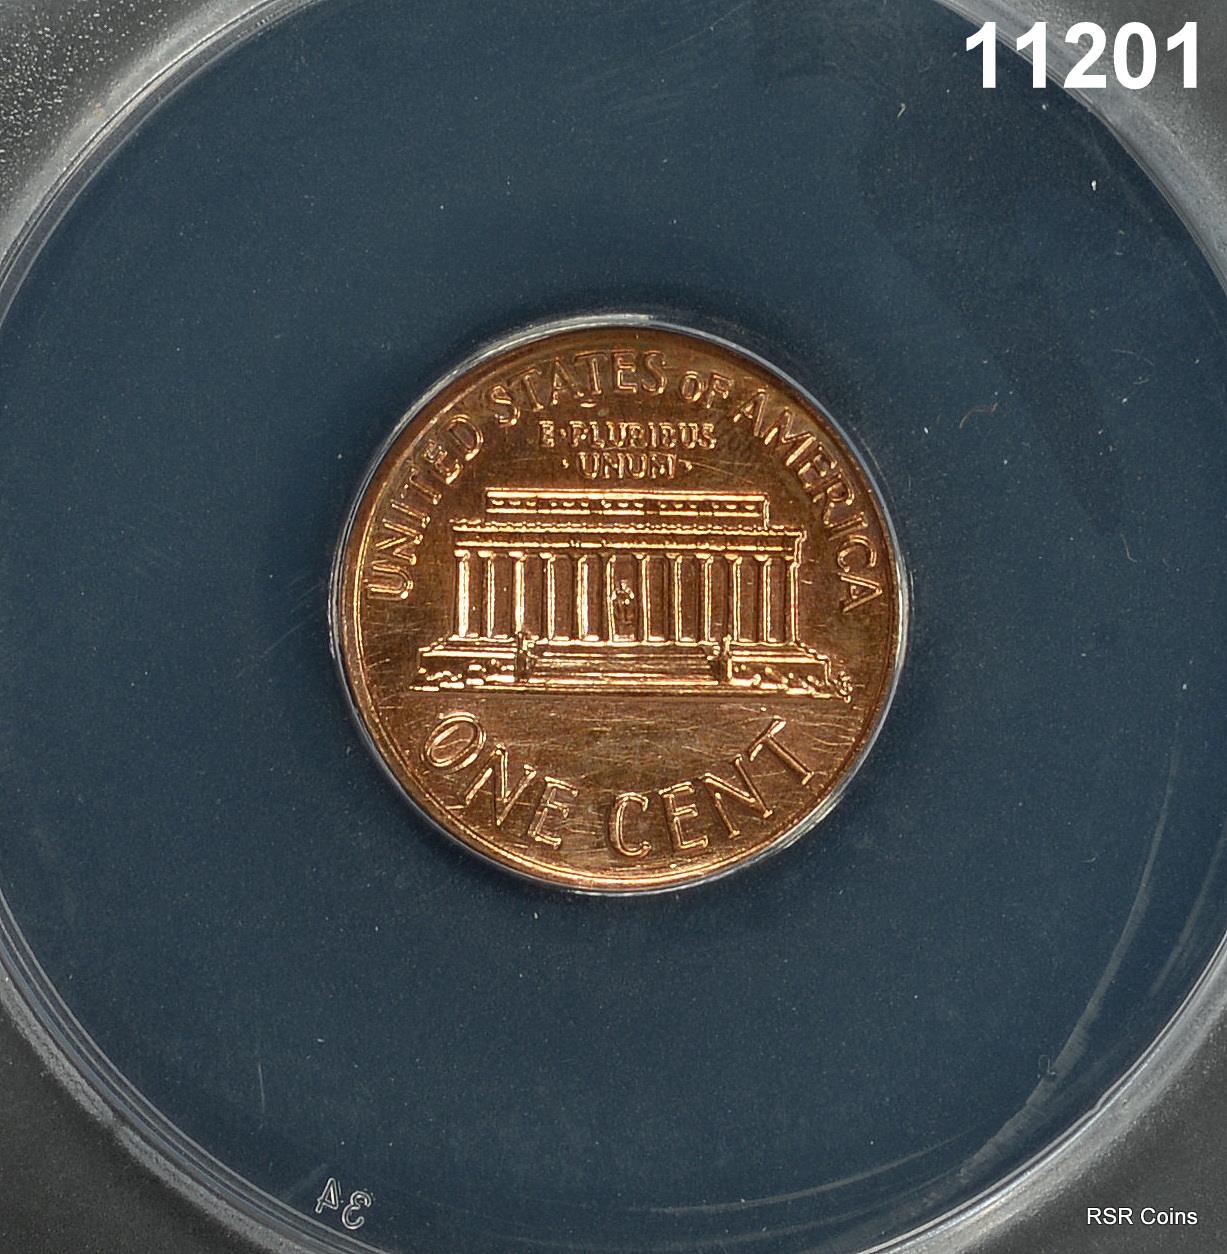 1972 LINCOLN CENT FS101 DDO 001 ANACS CERTIFIED AU58 POLISHED #11201